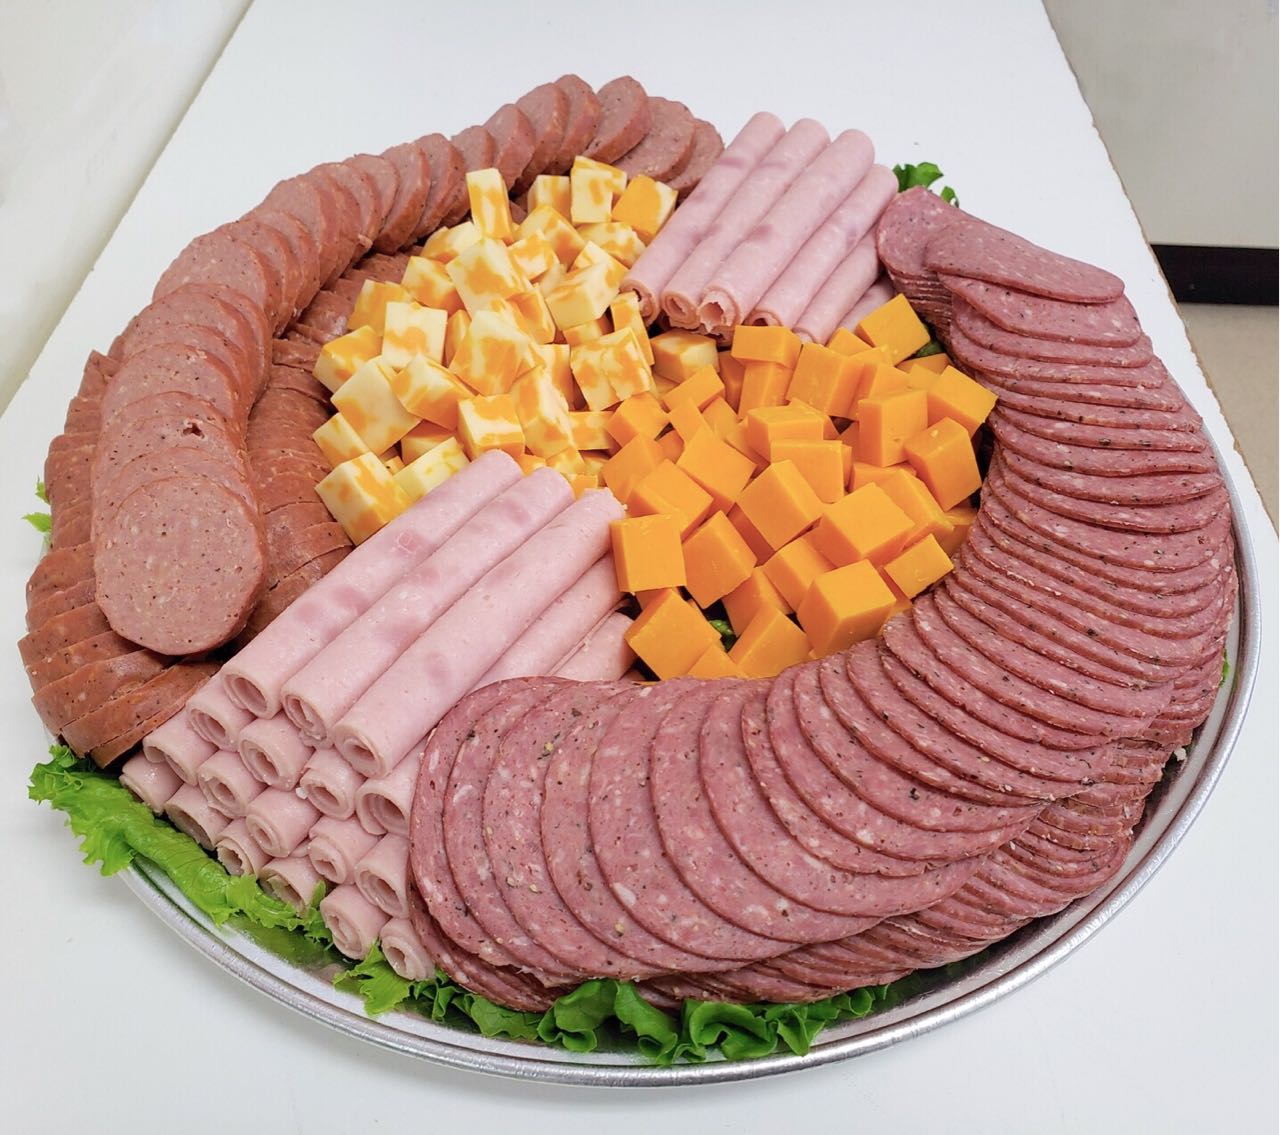 EastEnd Meats & Sausage Freshly-Prepared Meat, Cheese, Pickles Deli Trays for either wedding social, family party or business gathering in Winnipeg. Custom Menus Available